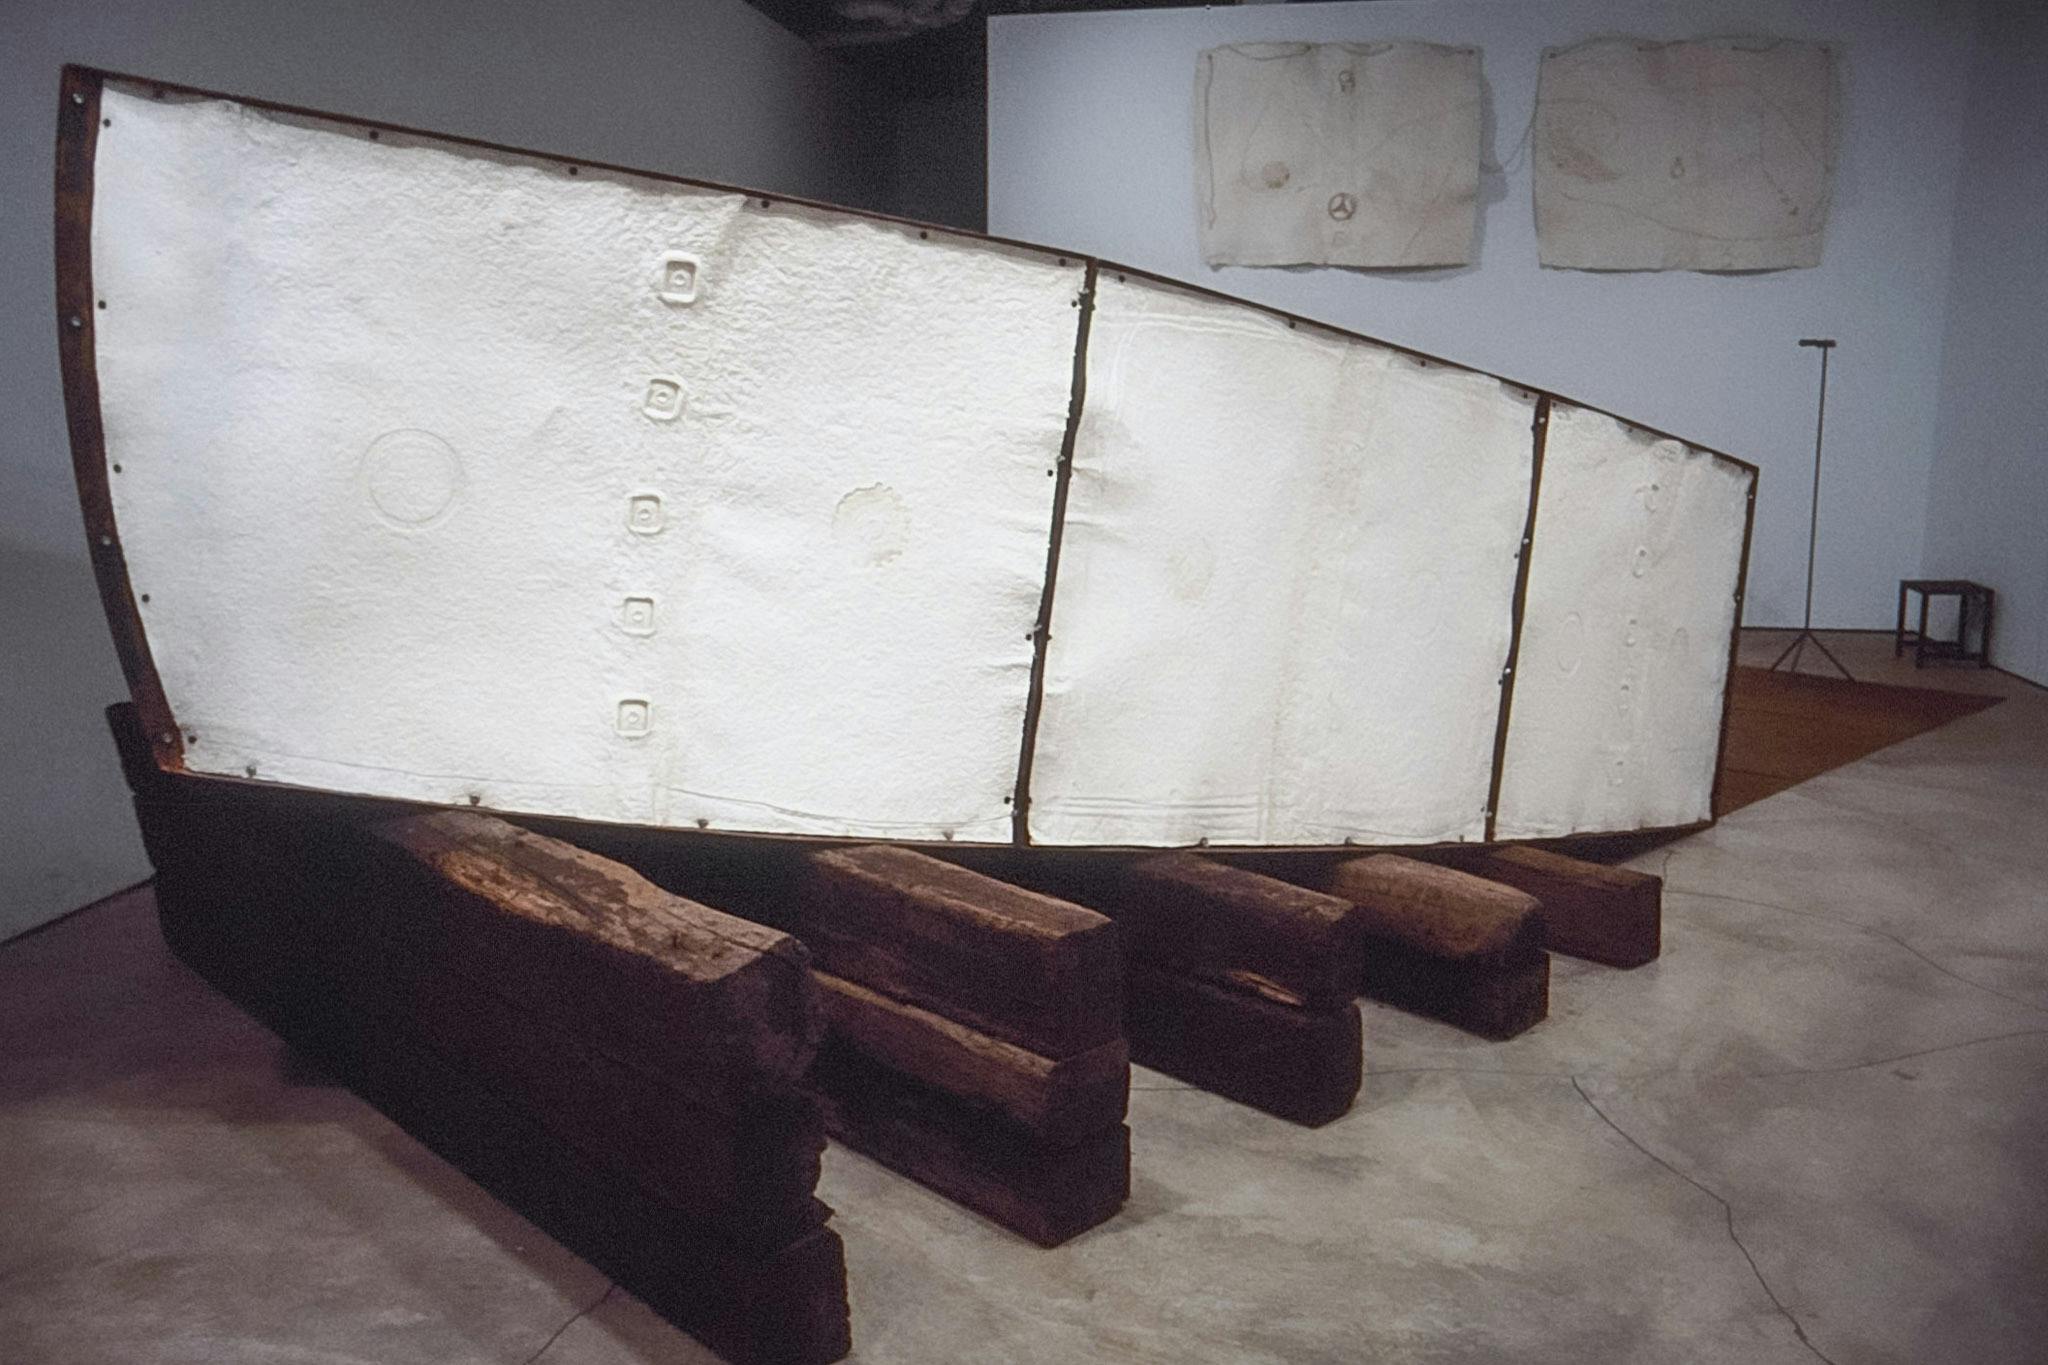 This is a side view of a boat head sculpture. White panels that seem to be made of parchments or pulp sheets cover the body of the boat. The boat is placed on the wooden bars placed on the floor. 